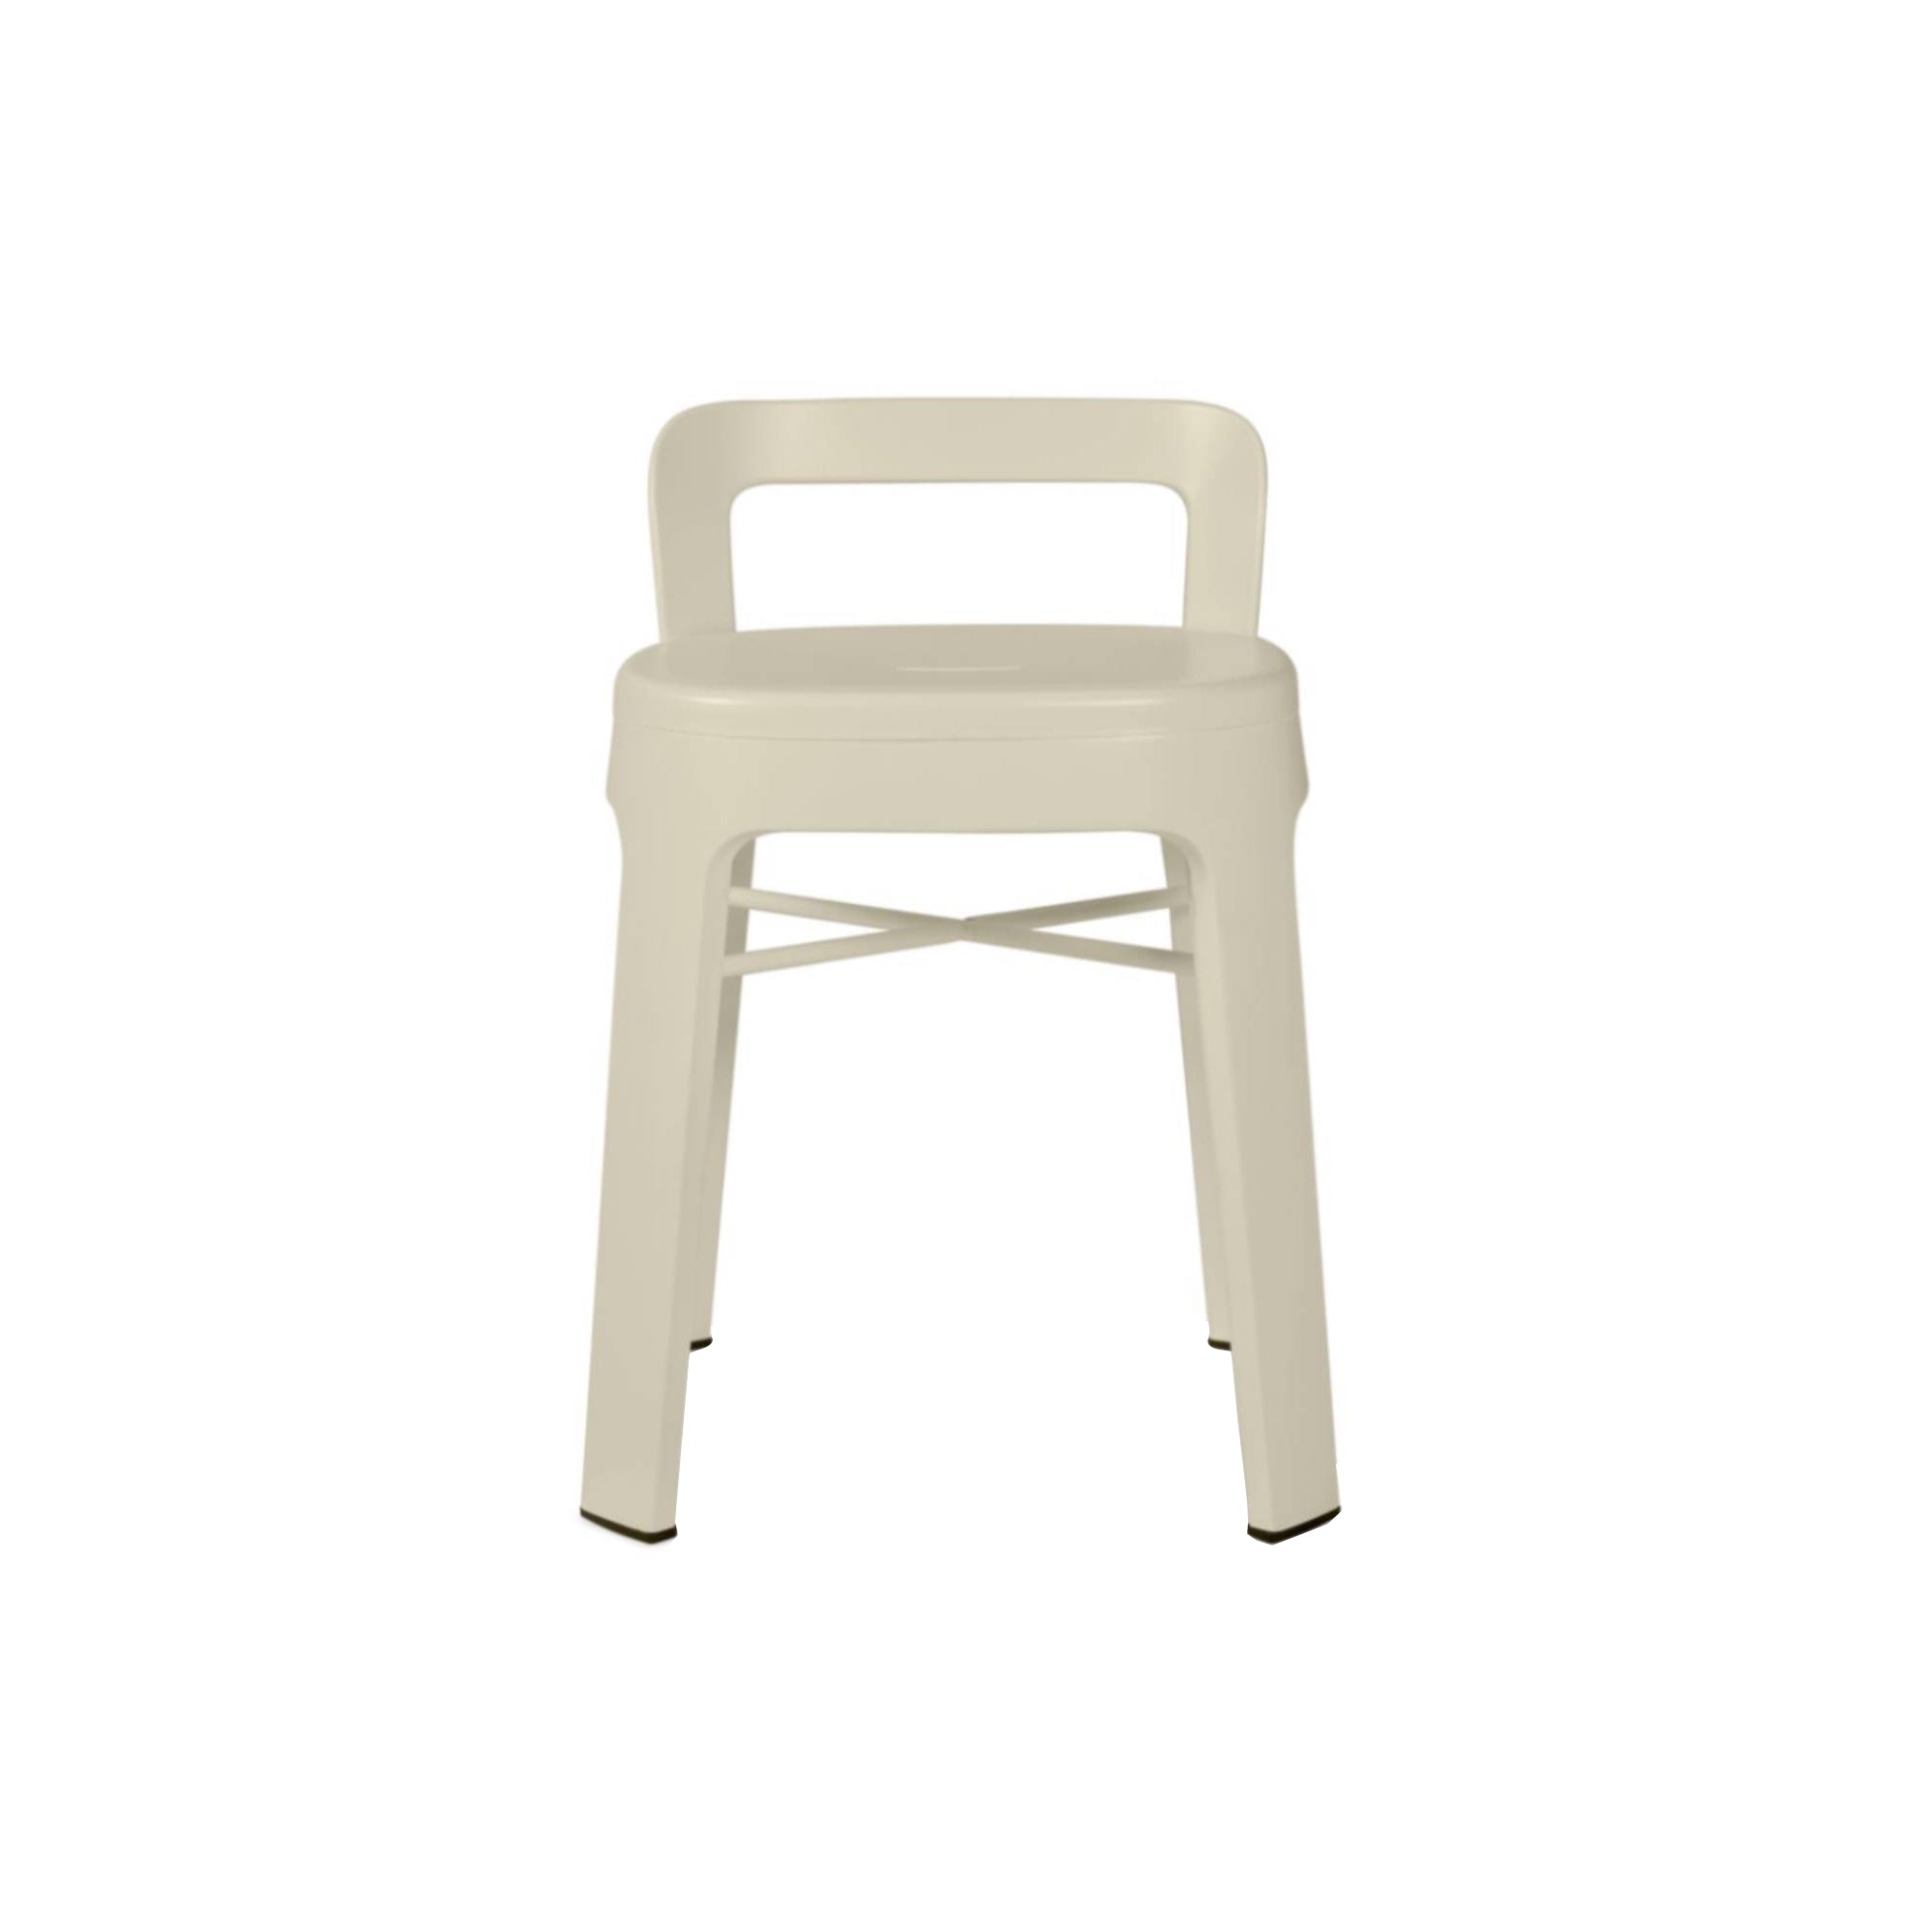 Ombra Stool with Backrest: Grey